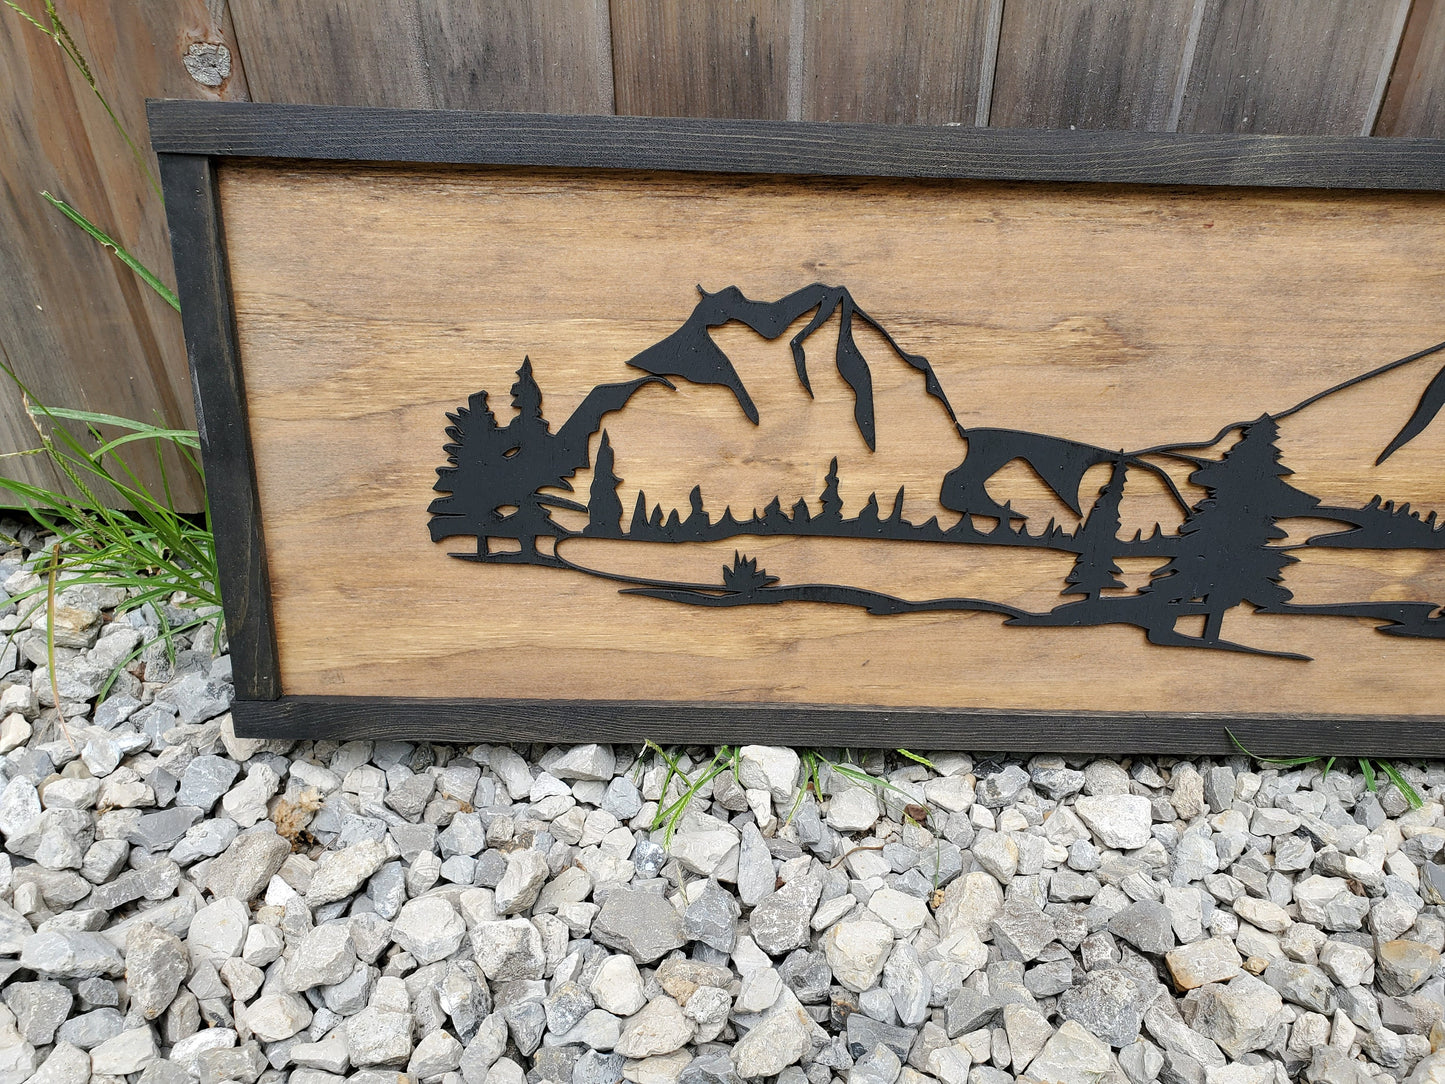 Mountain Scenery, 3D, Raised, Mountain, River, Pine Tree, Over Sized Sign, Rustic, Ranch Over Sized, Wood, Laser Cut, Detail, Cabin